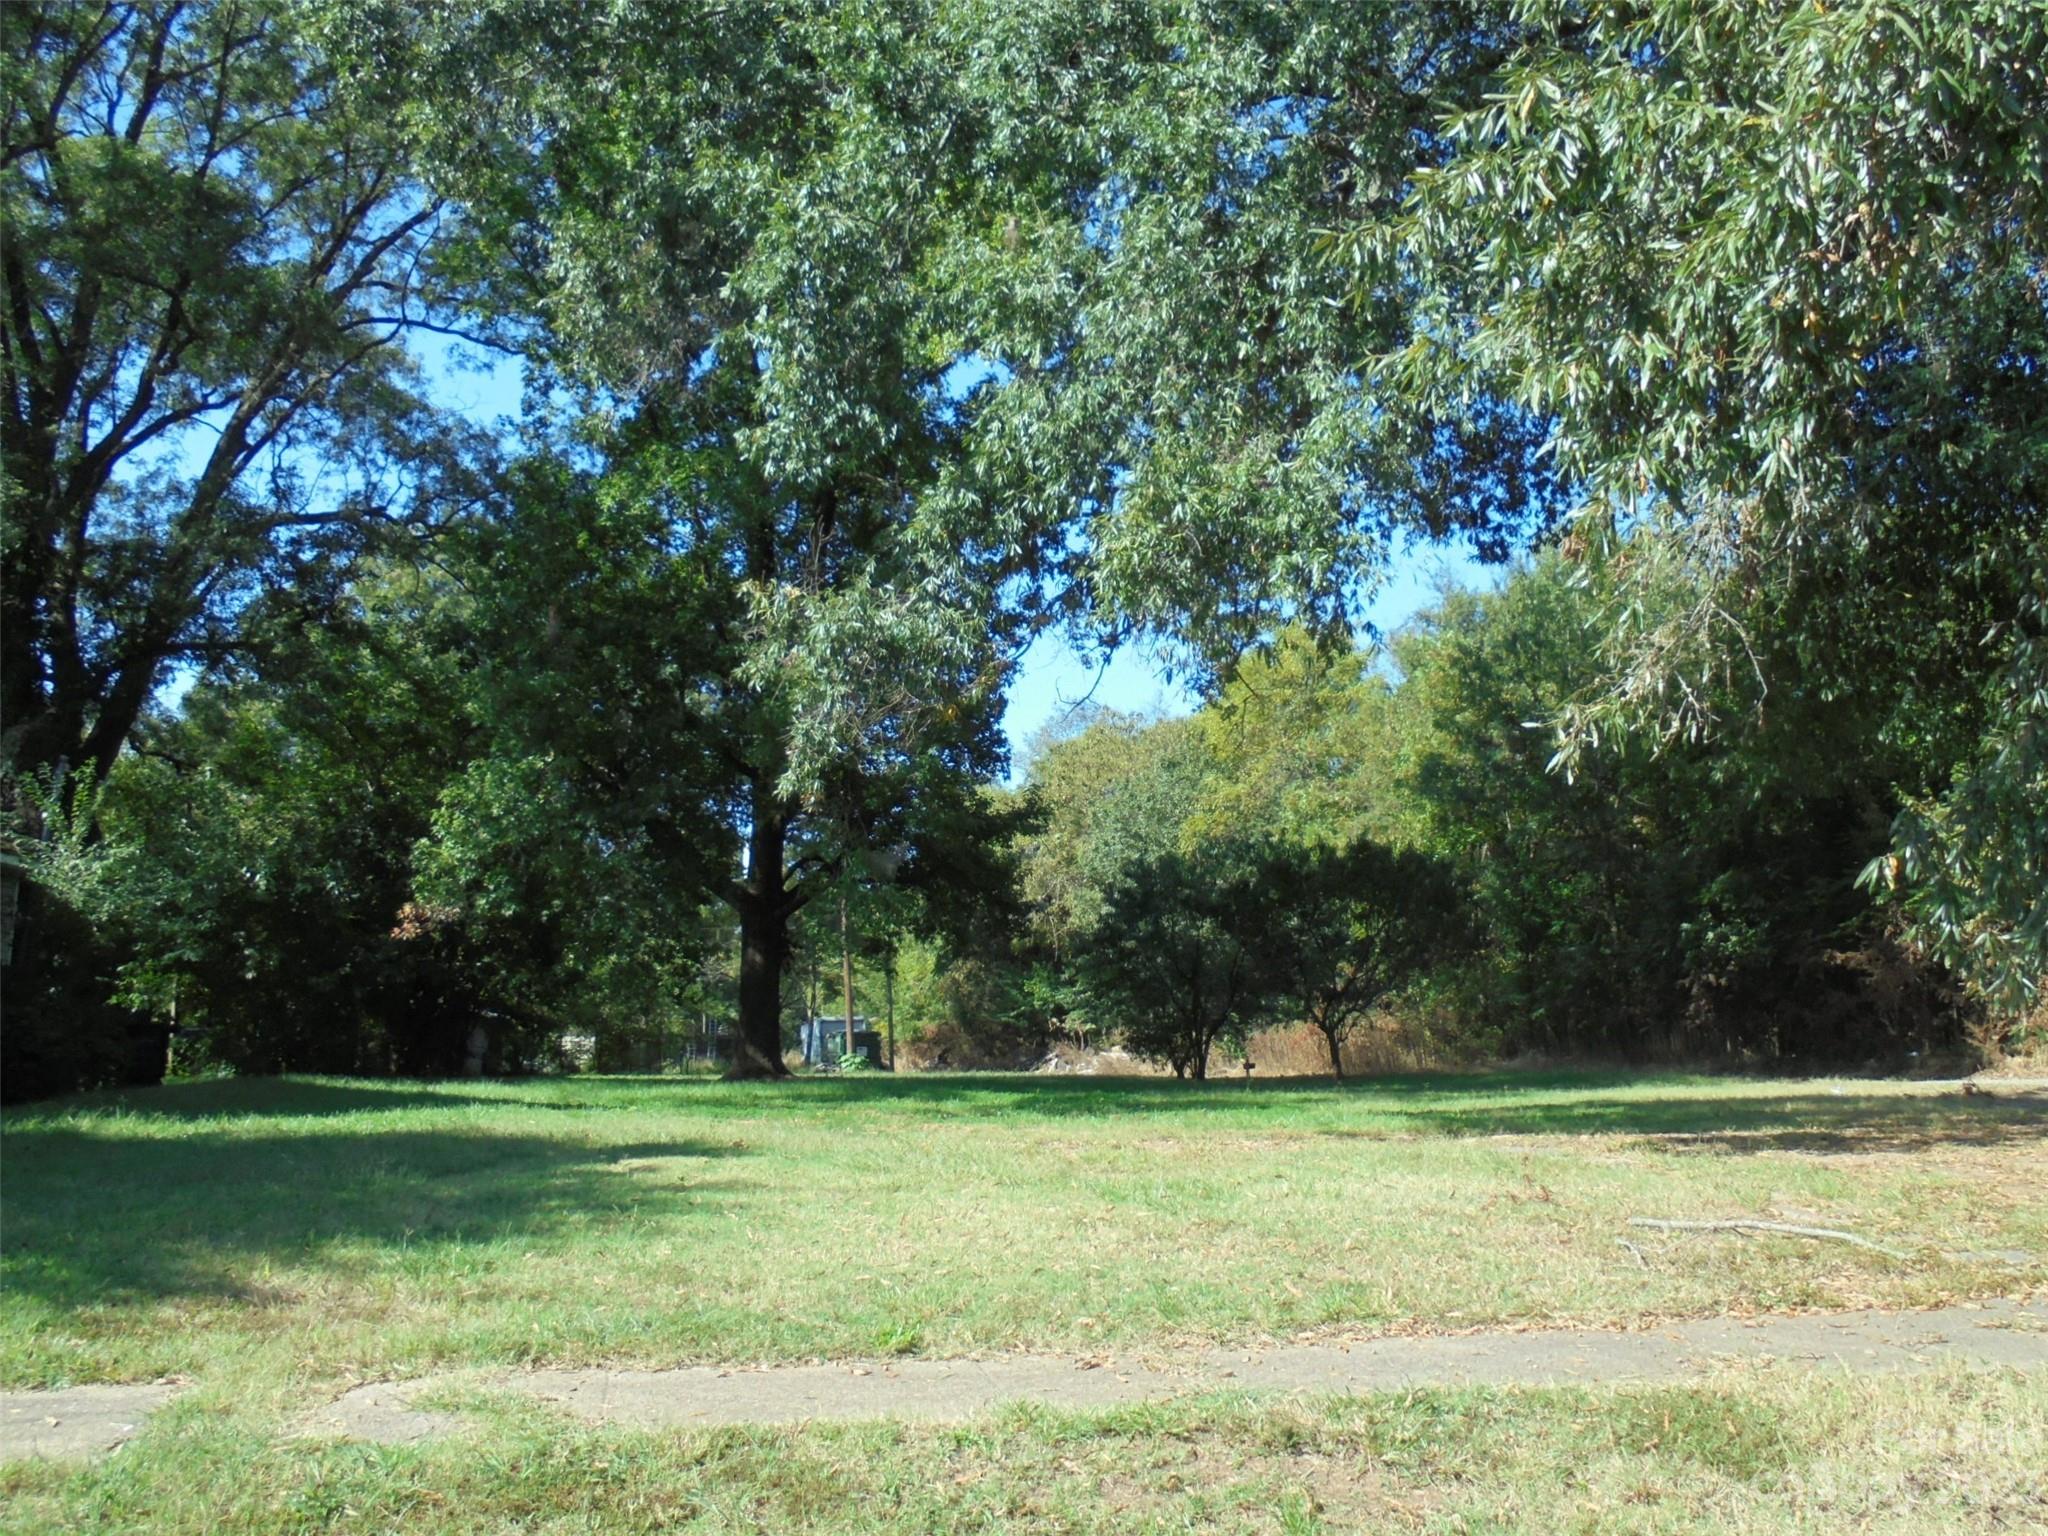 a view of a grassy field with trees